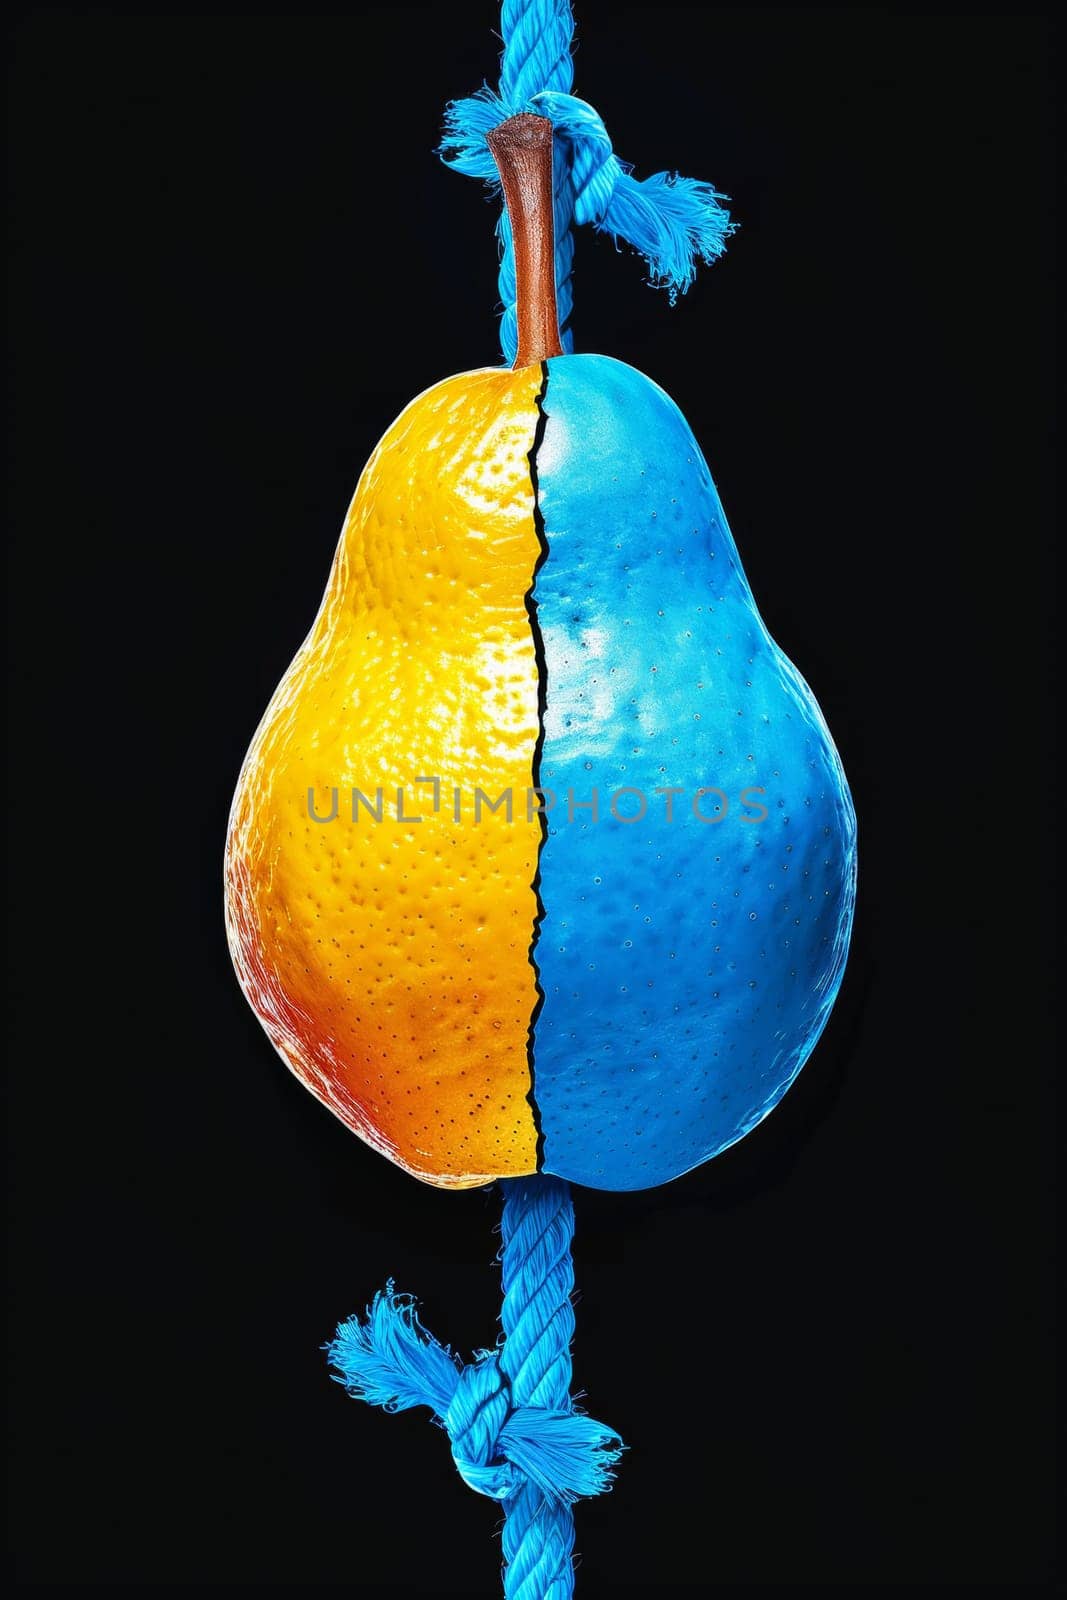 A pear with half blue and half yellow on a rope